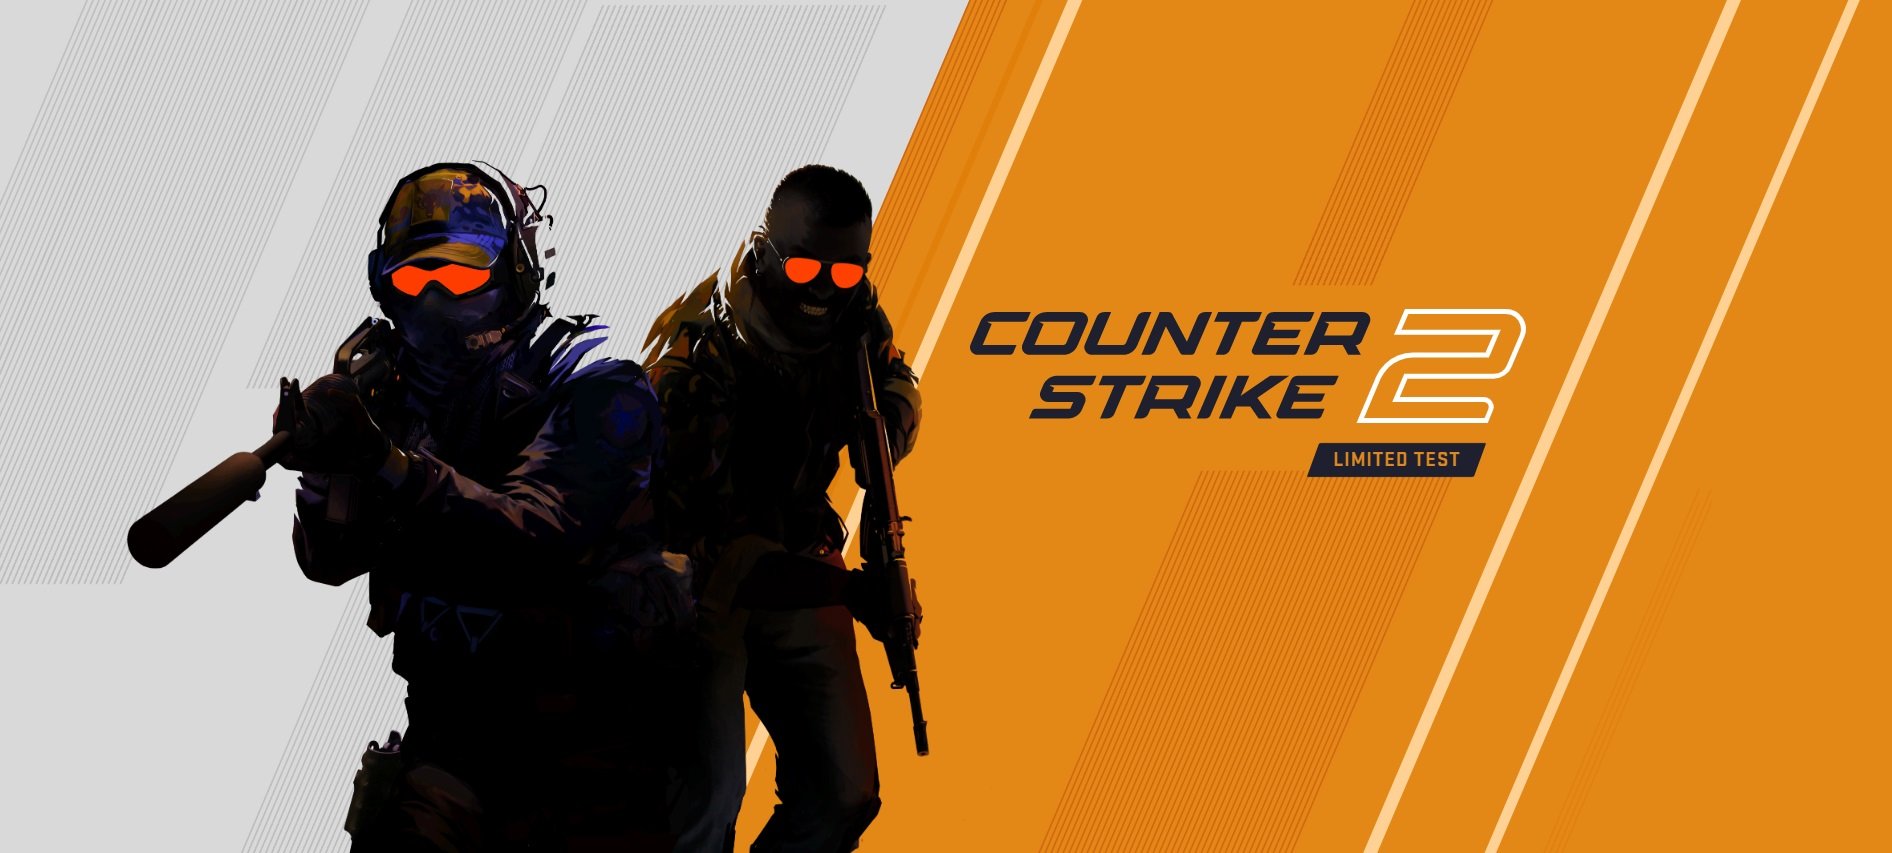 Competitive CS:GO will be returning to Brazil in 2023 - Counter-Strike:  Global Offensive - Gamereactor